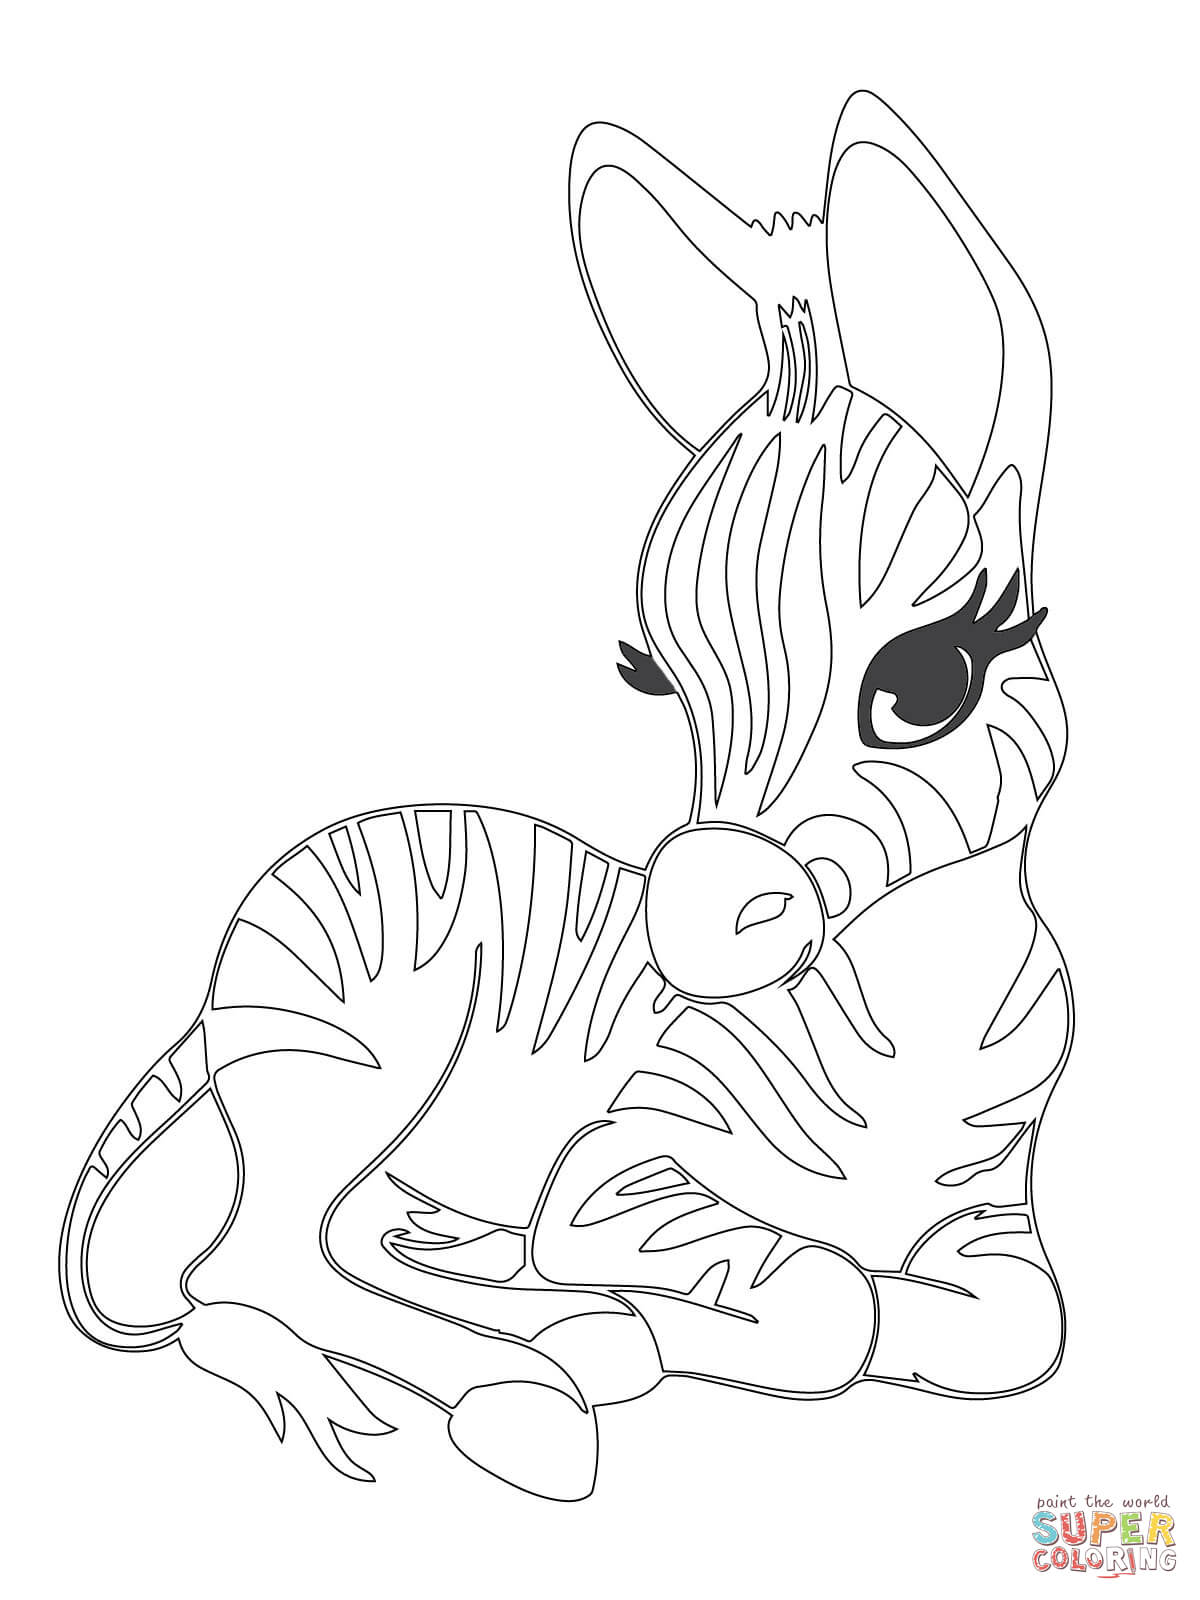 Cute Baby Zebra Coloring Online. Cute Animal Coloring Pages For ...